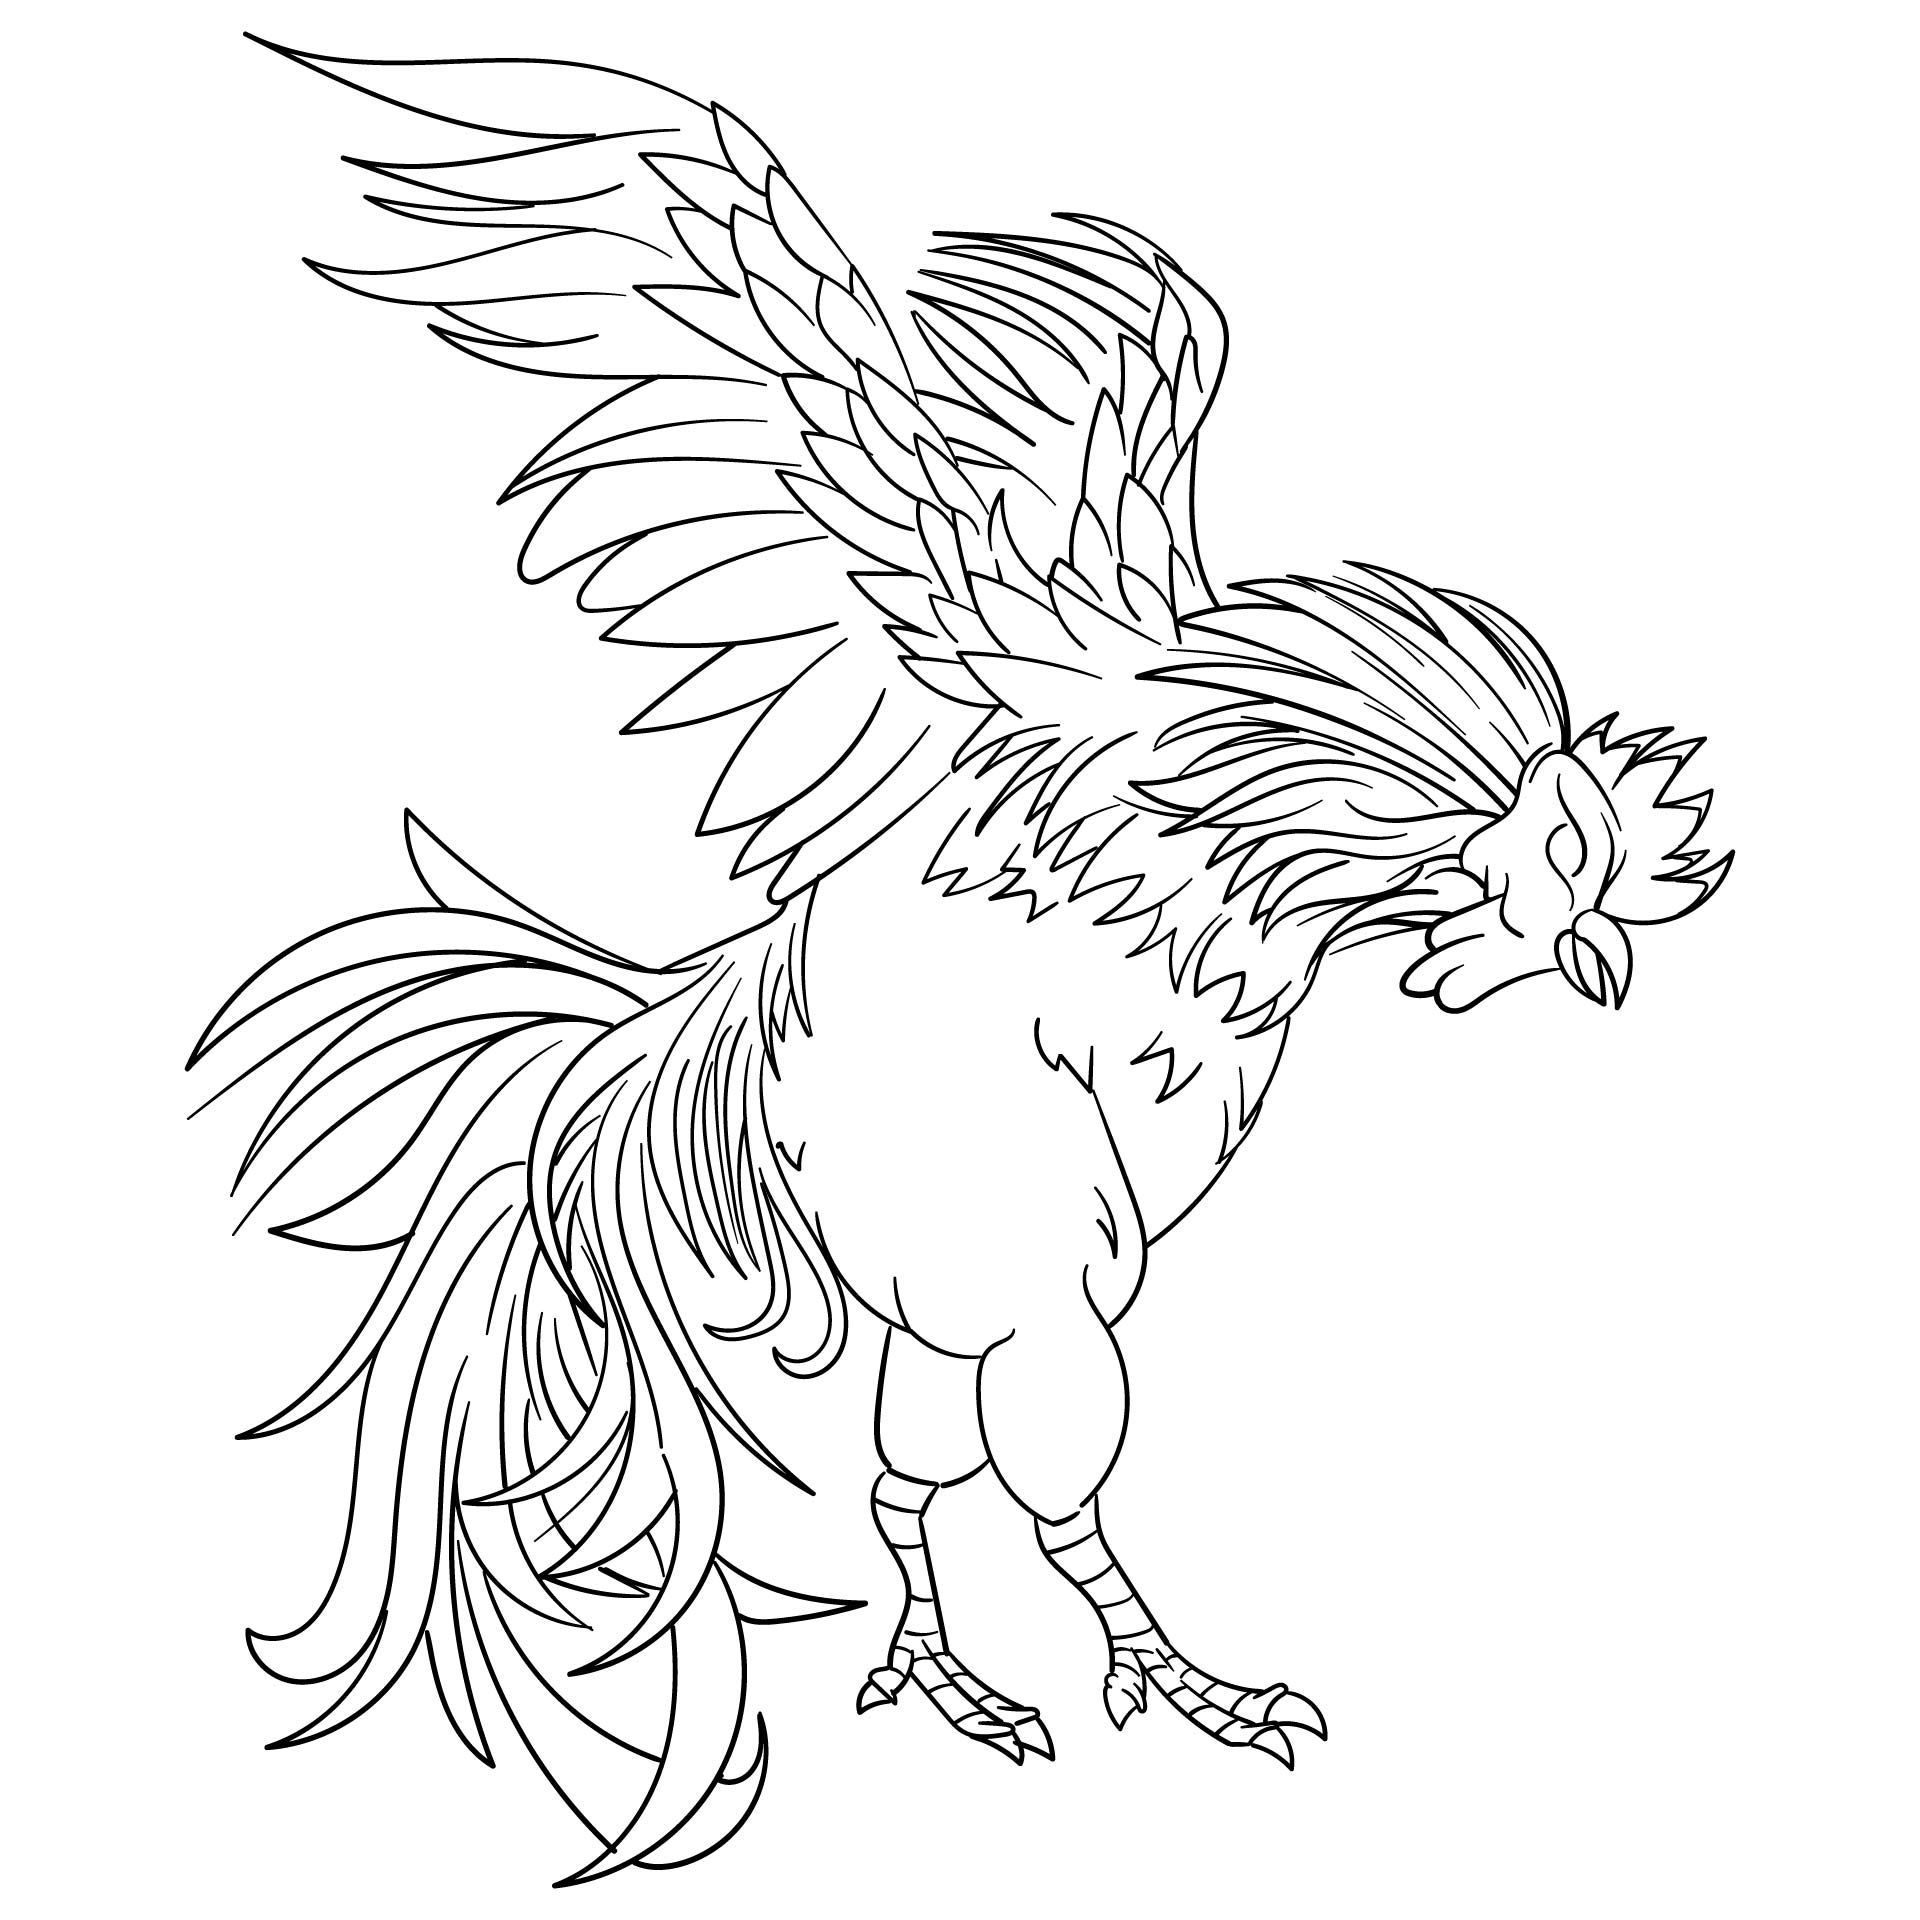 Printable Rooster Coloring Page